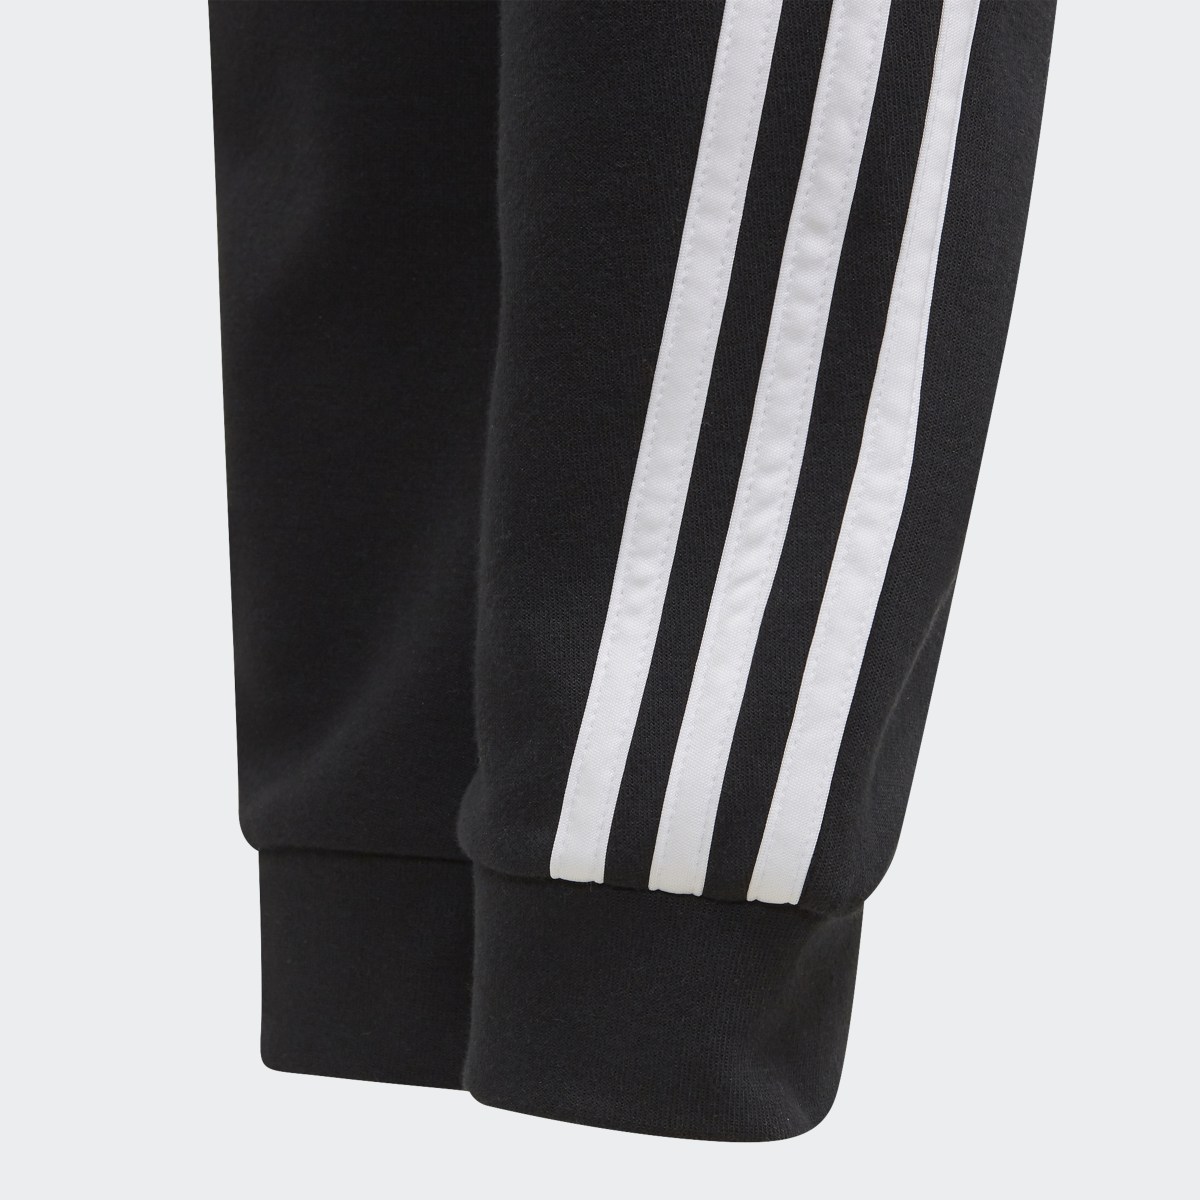 Adidas 3-Stripes Tapered Leg Tracksuit Bottoms. 5